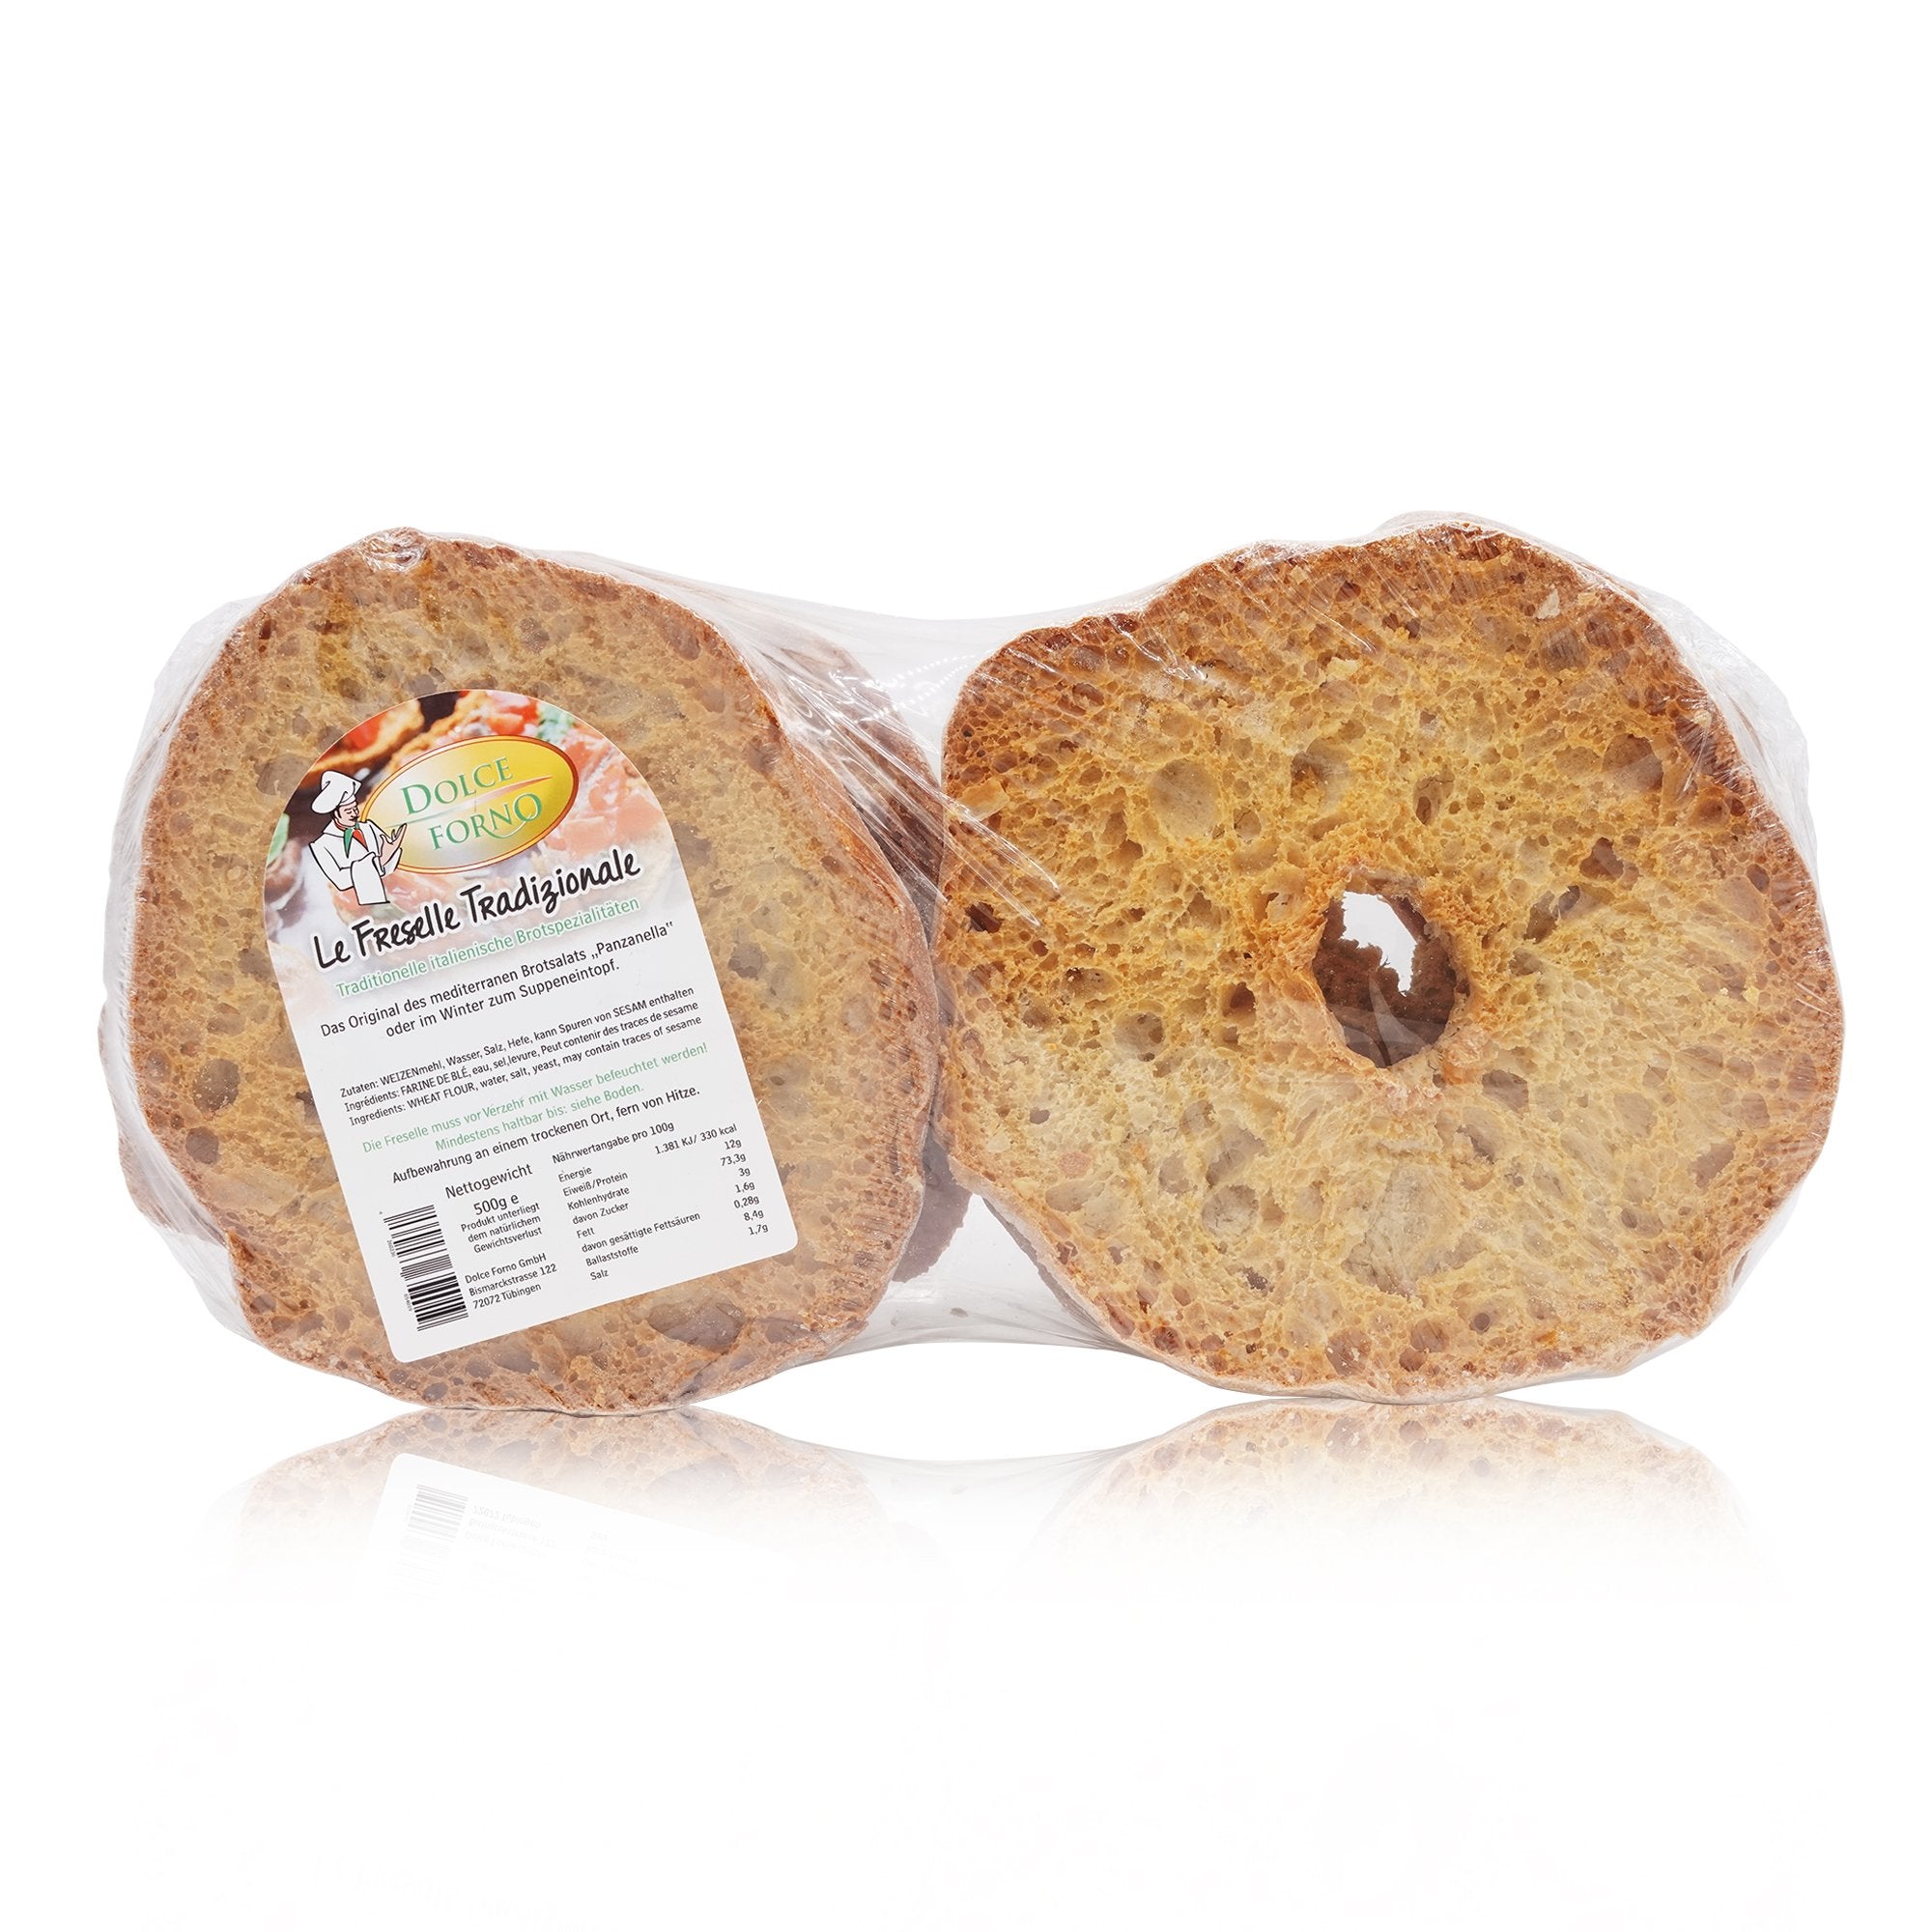 DOLCE FORNO Freselle tradizionale – Hartbrot Traditional - 0,5kg